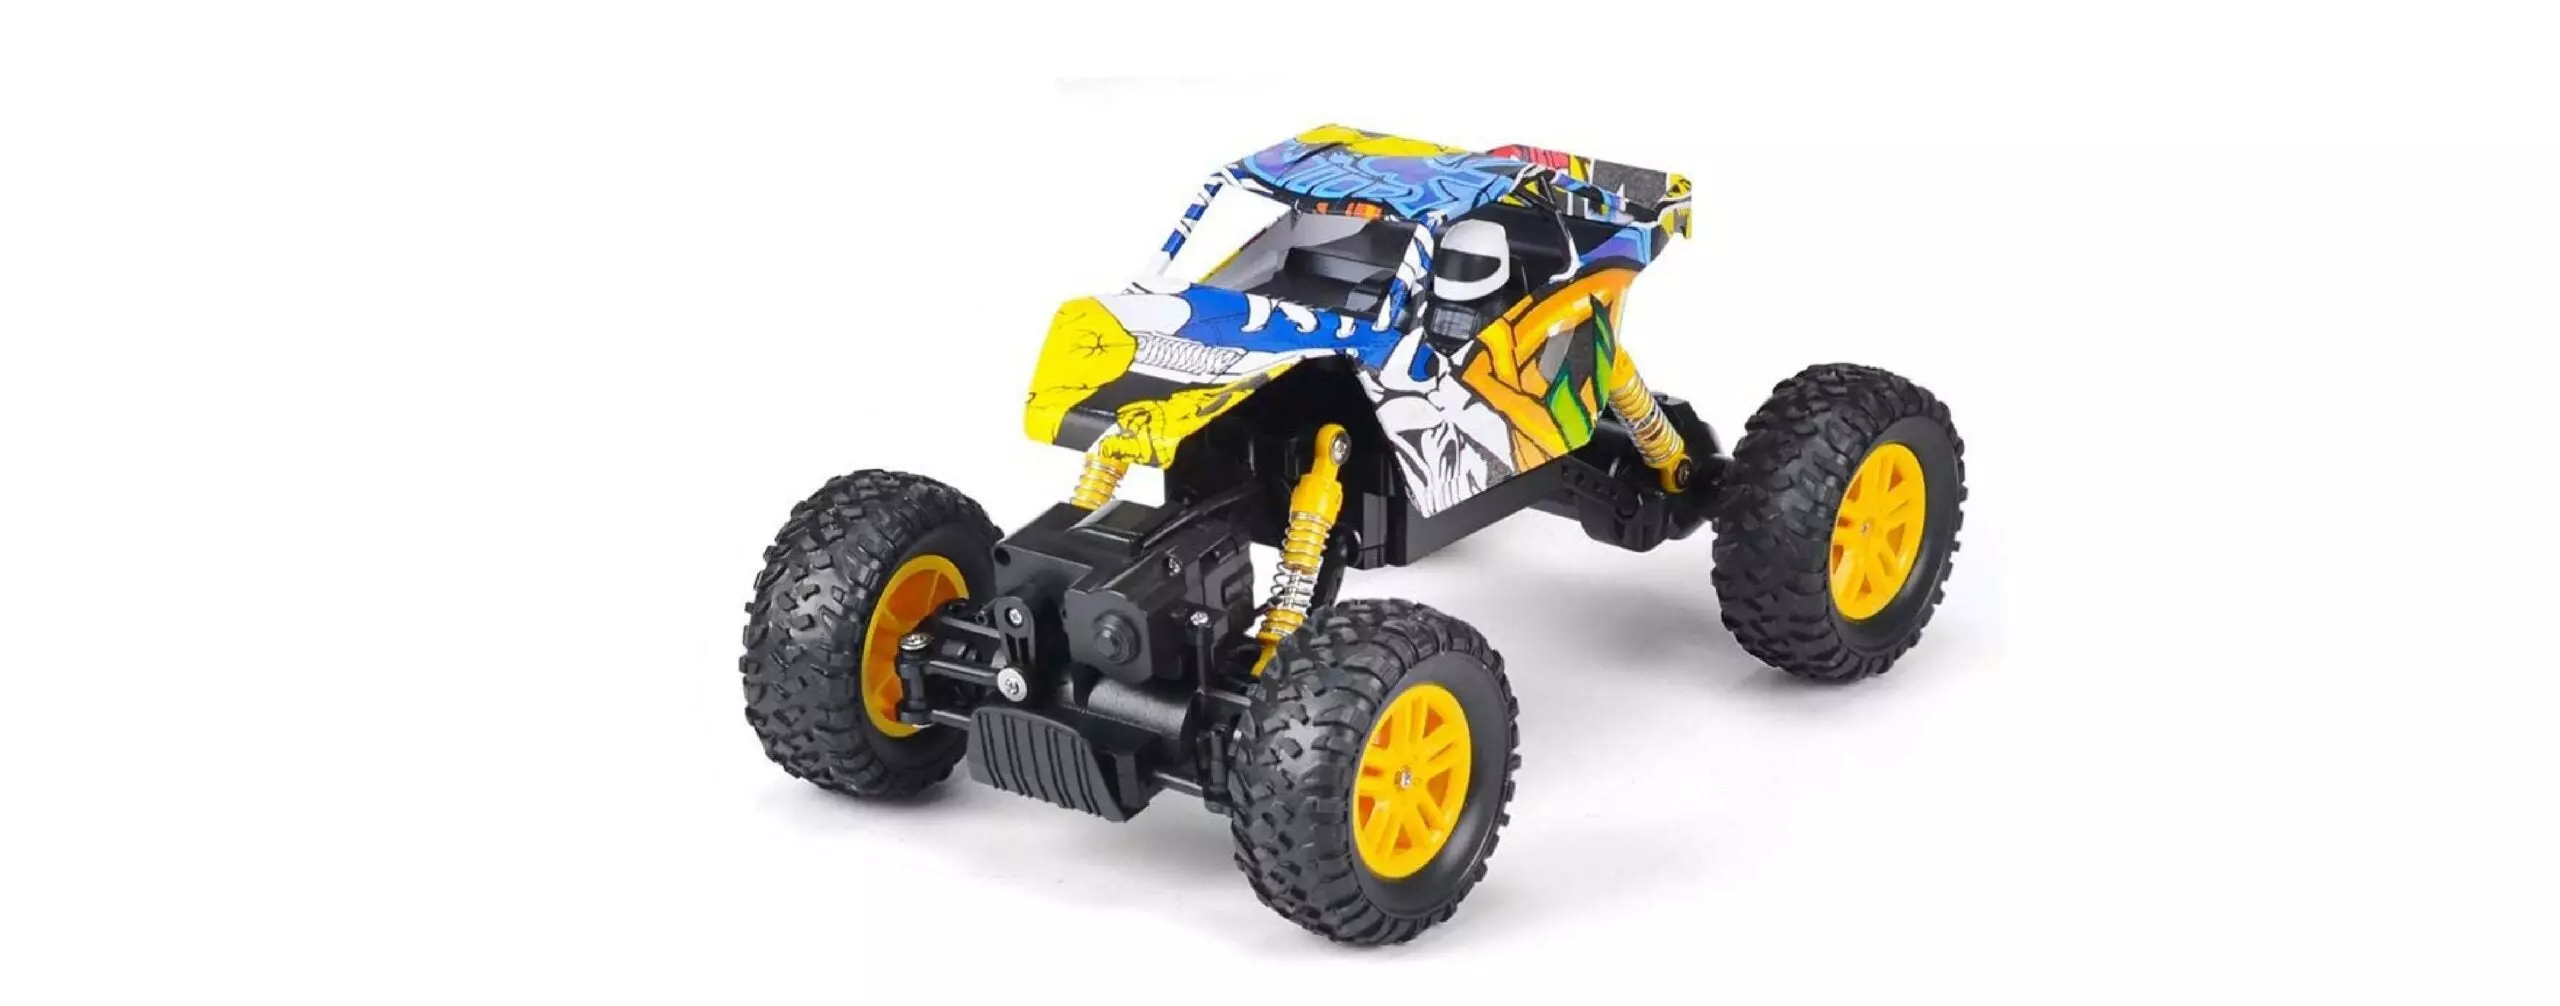 The Best RC Trucks (Review & Buying Guide) in 2022